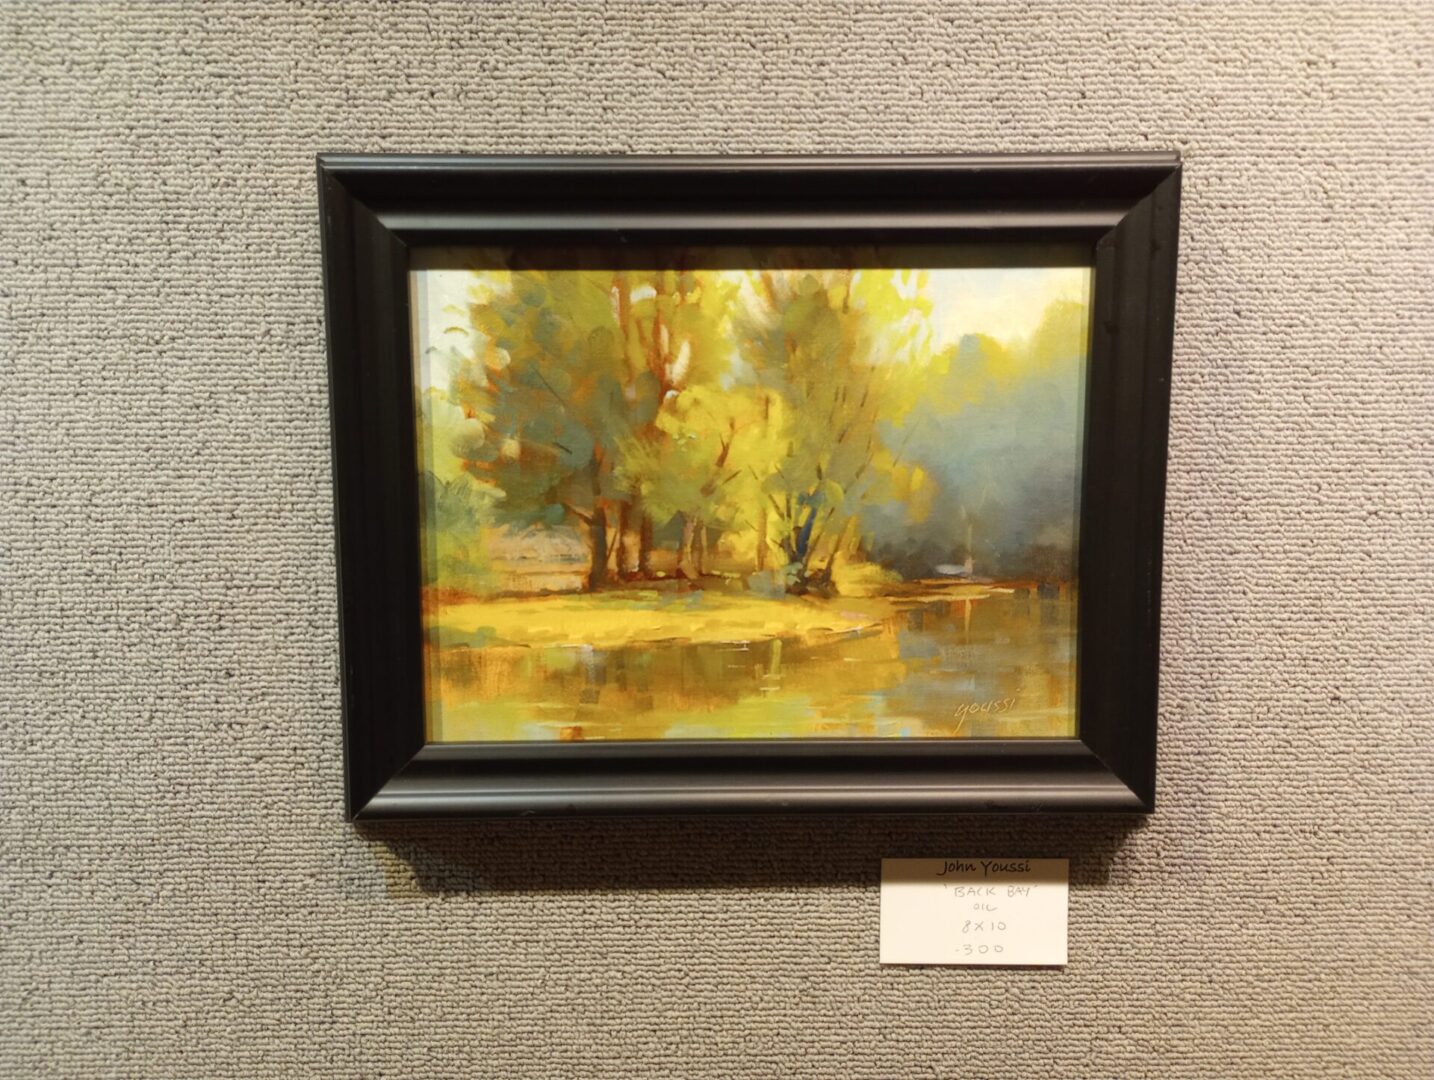 A framed painting of trees on a wall.